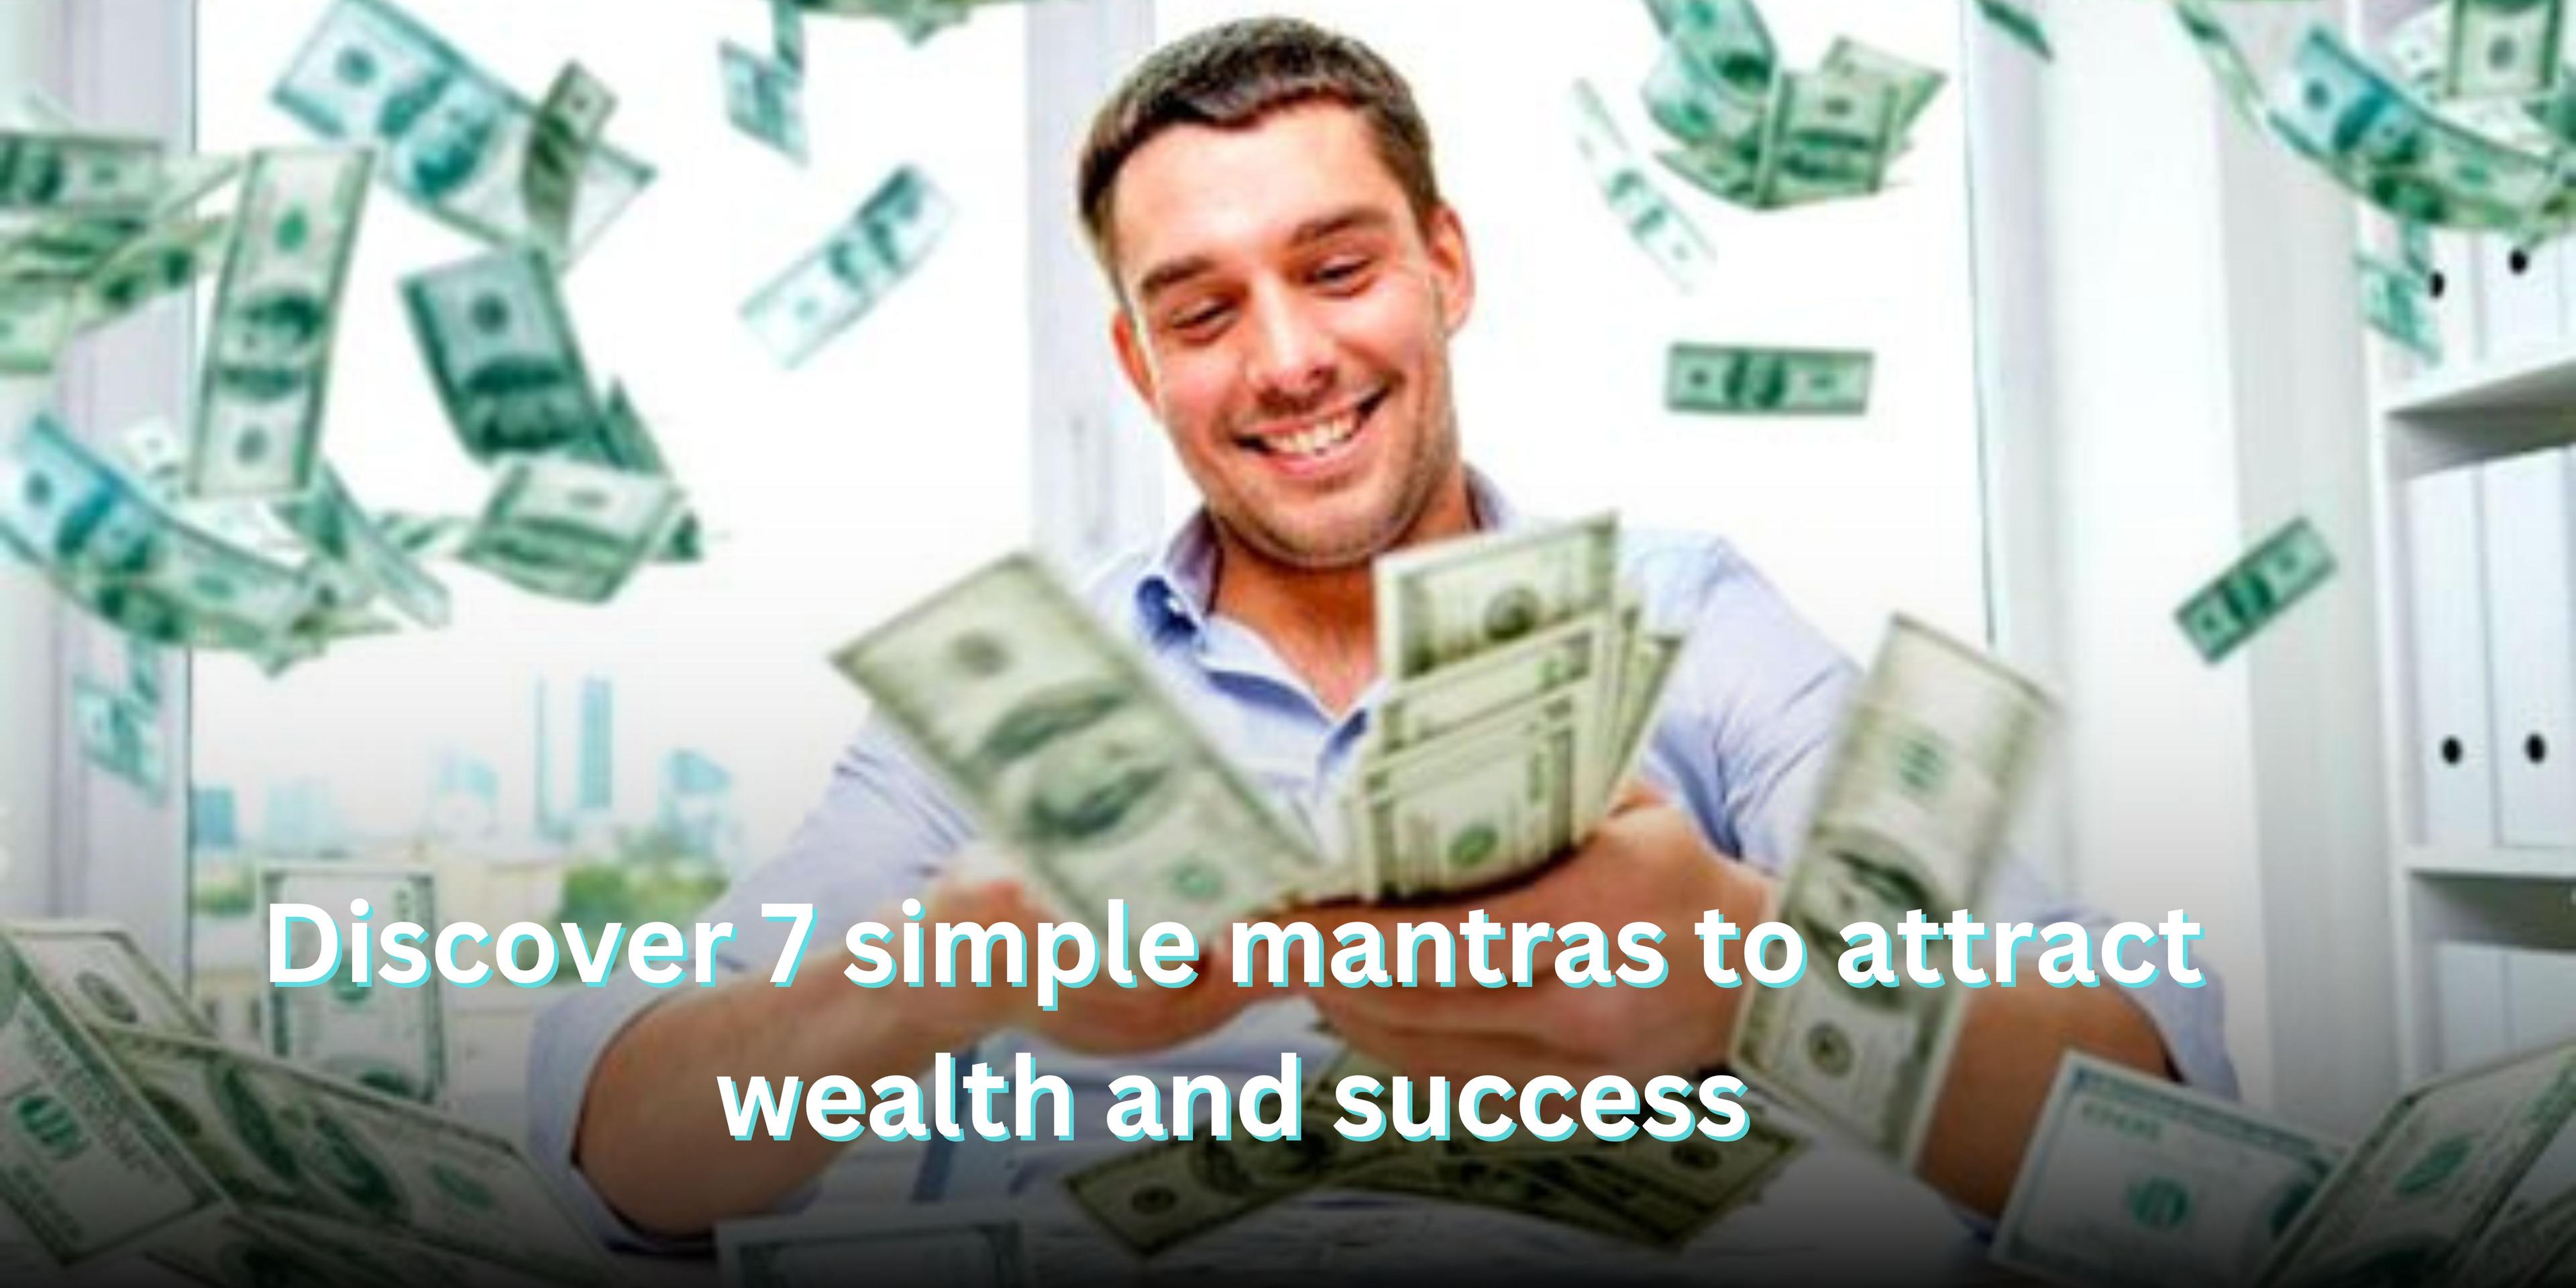 Discover 7 simple mantras to attract wealth and success